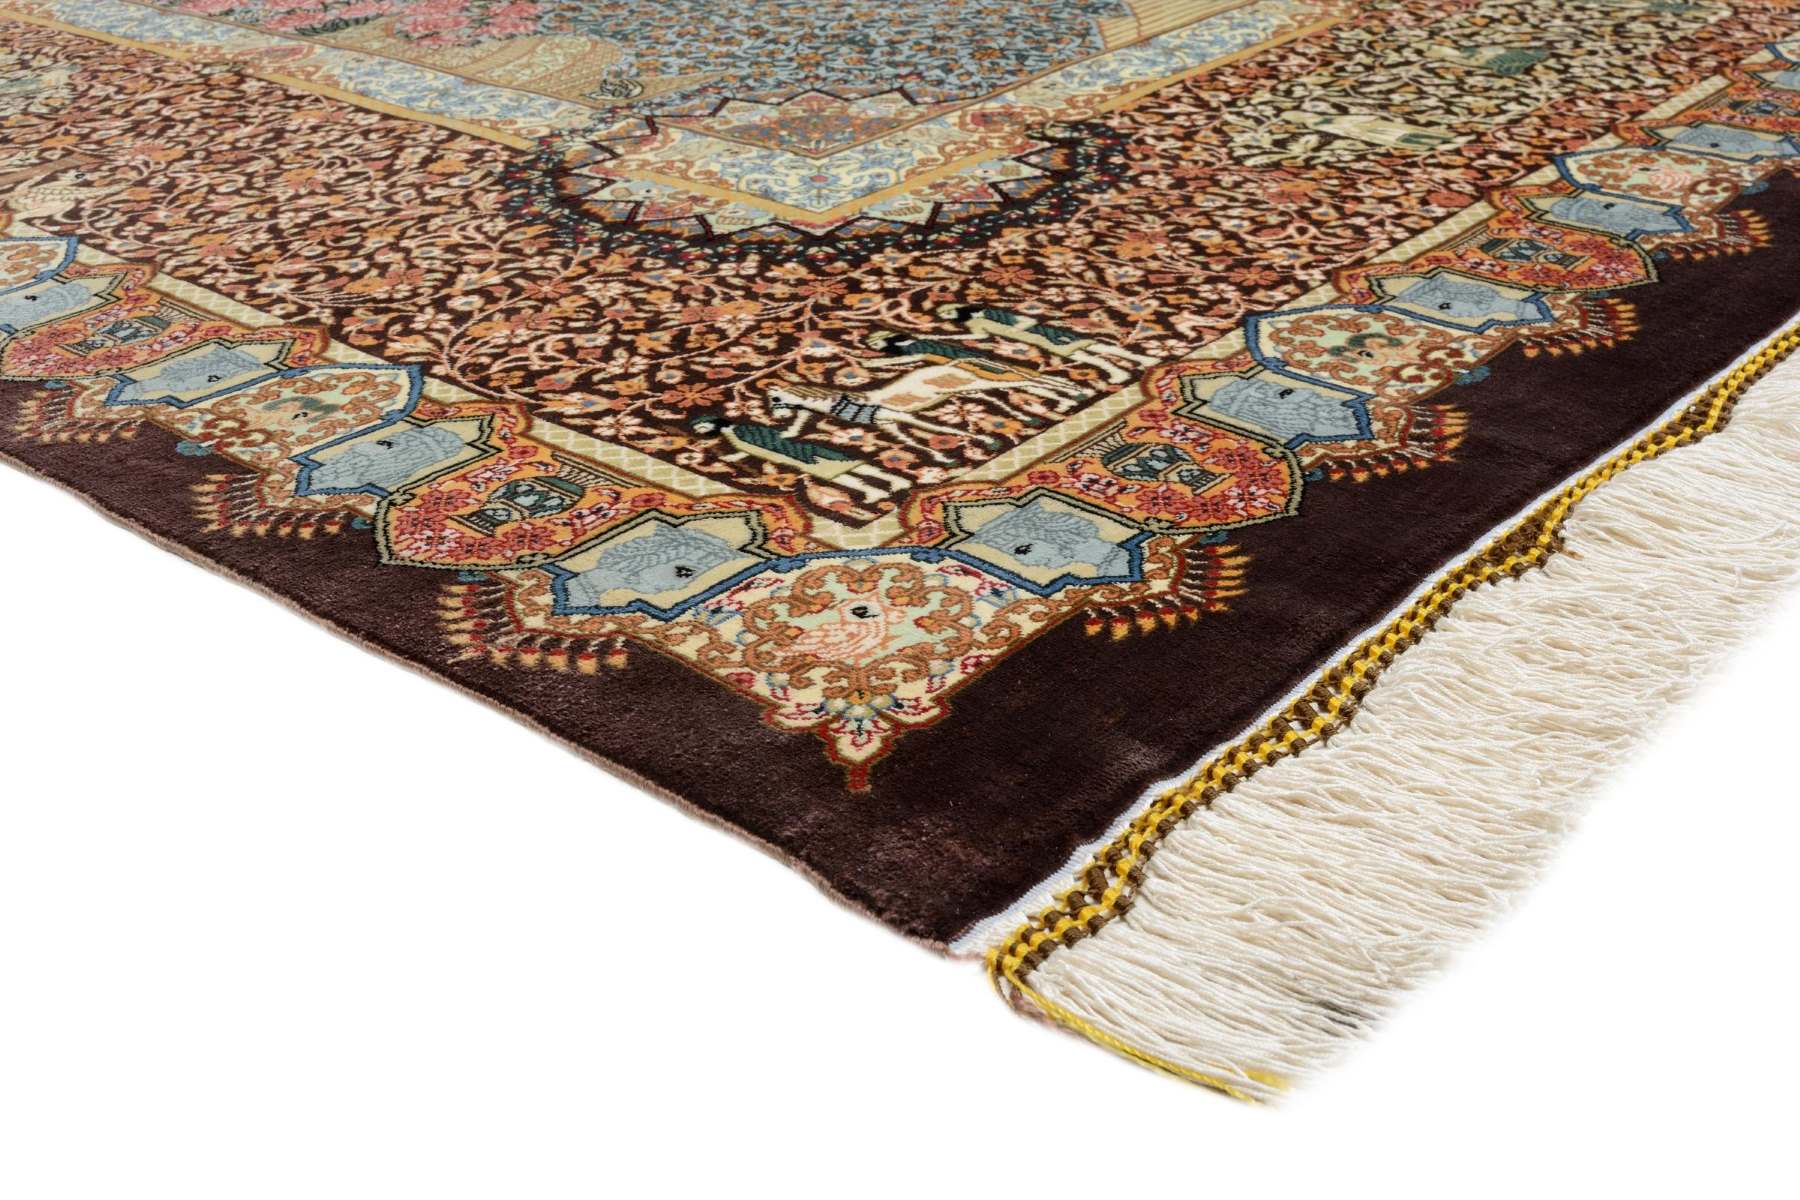 How To Identify Antique Persian Rugs